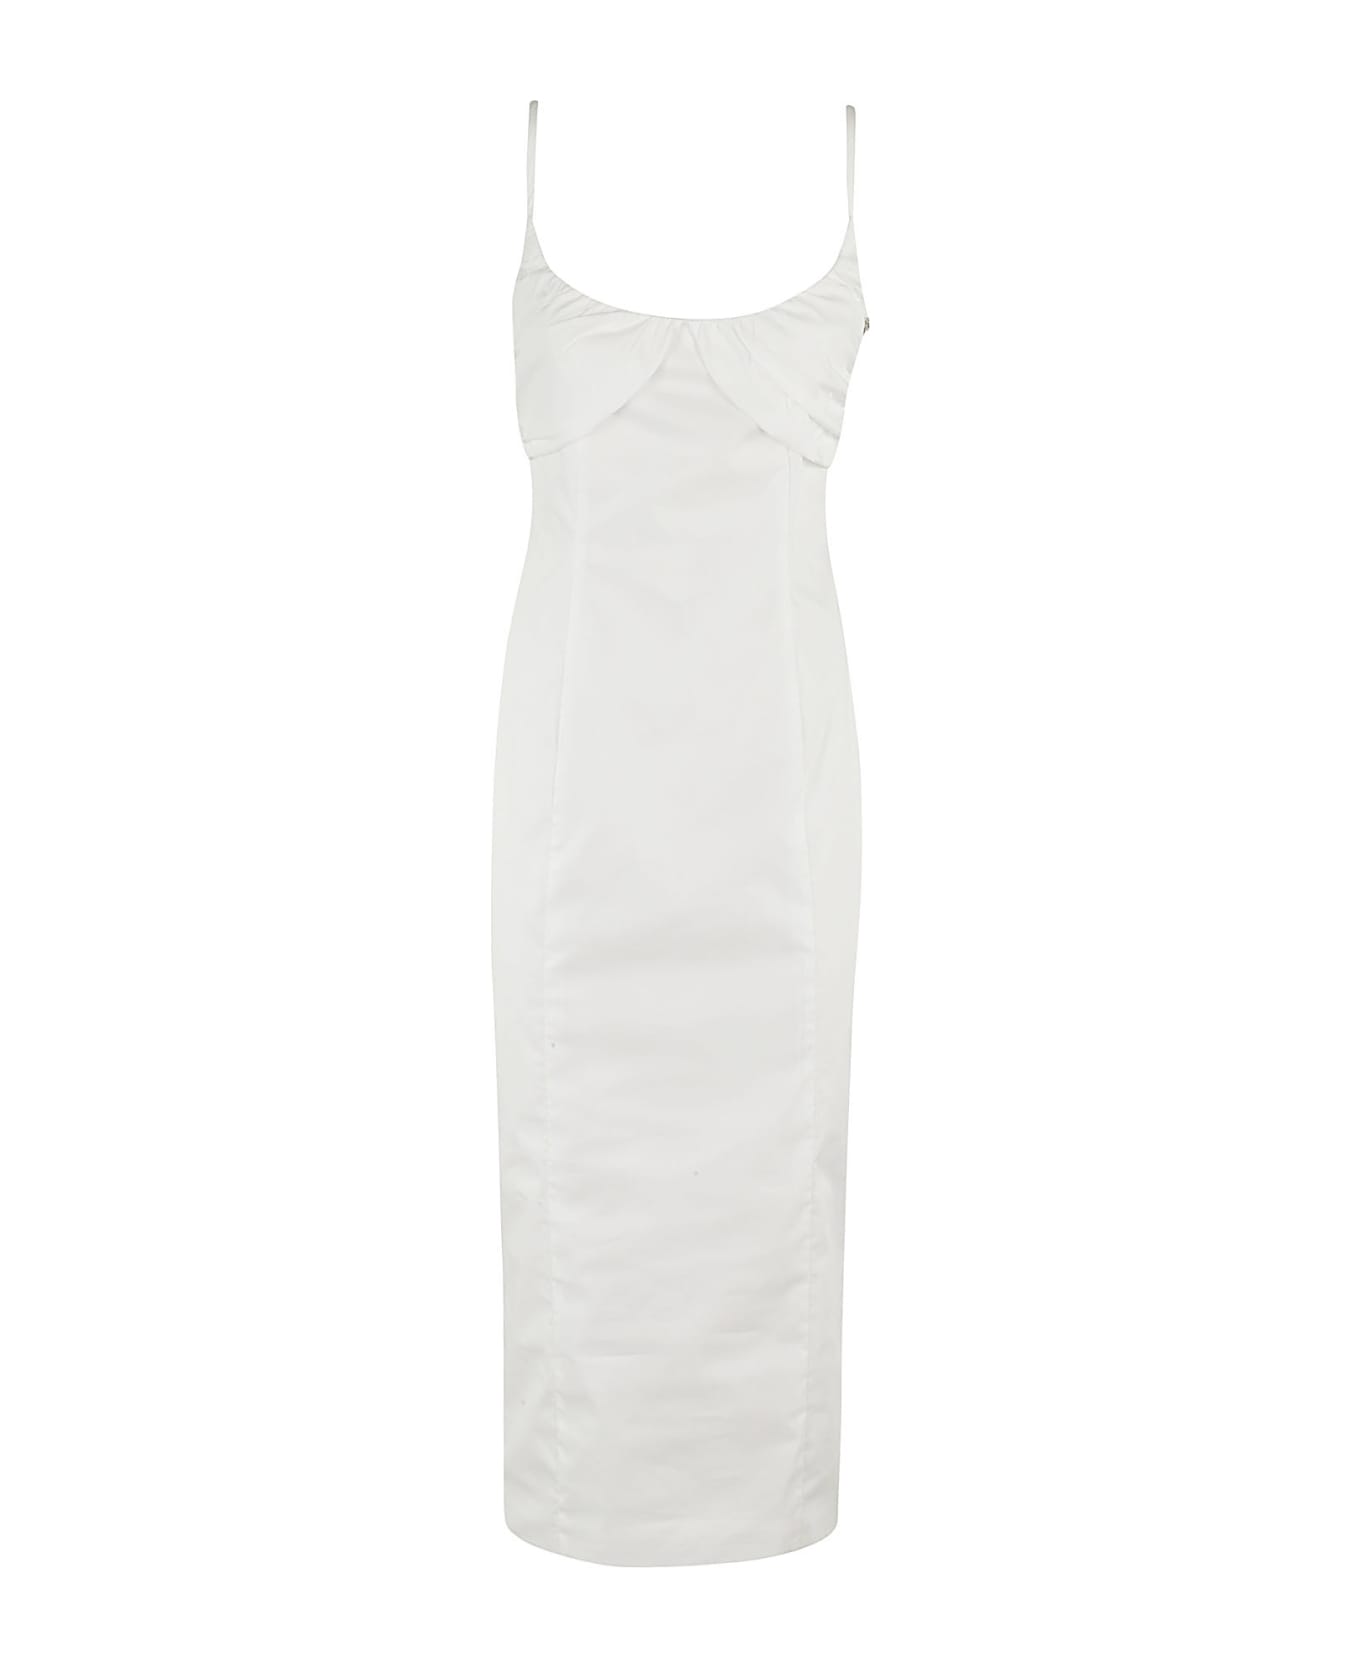 Rotate by Birger Christensen 'ruched Cup Midi Dress' Cotton Dress - WHITE